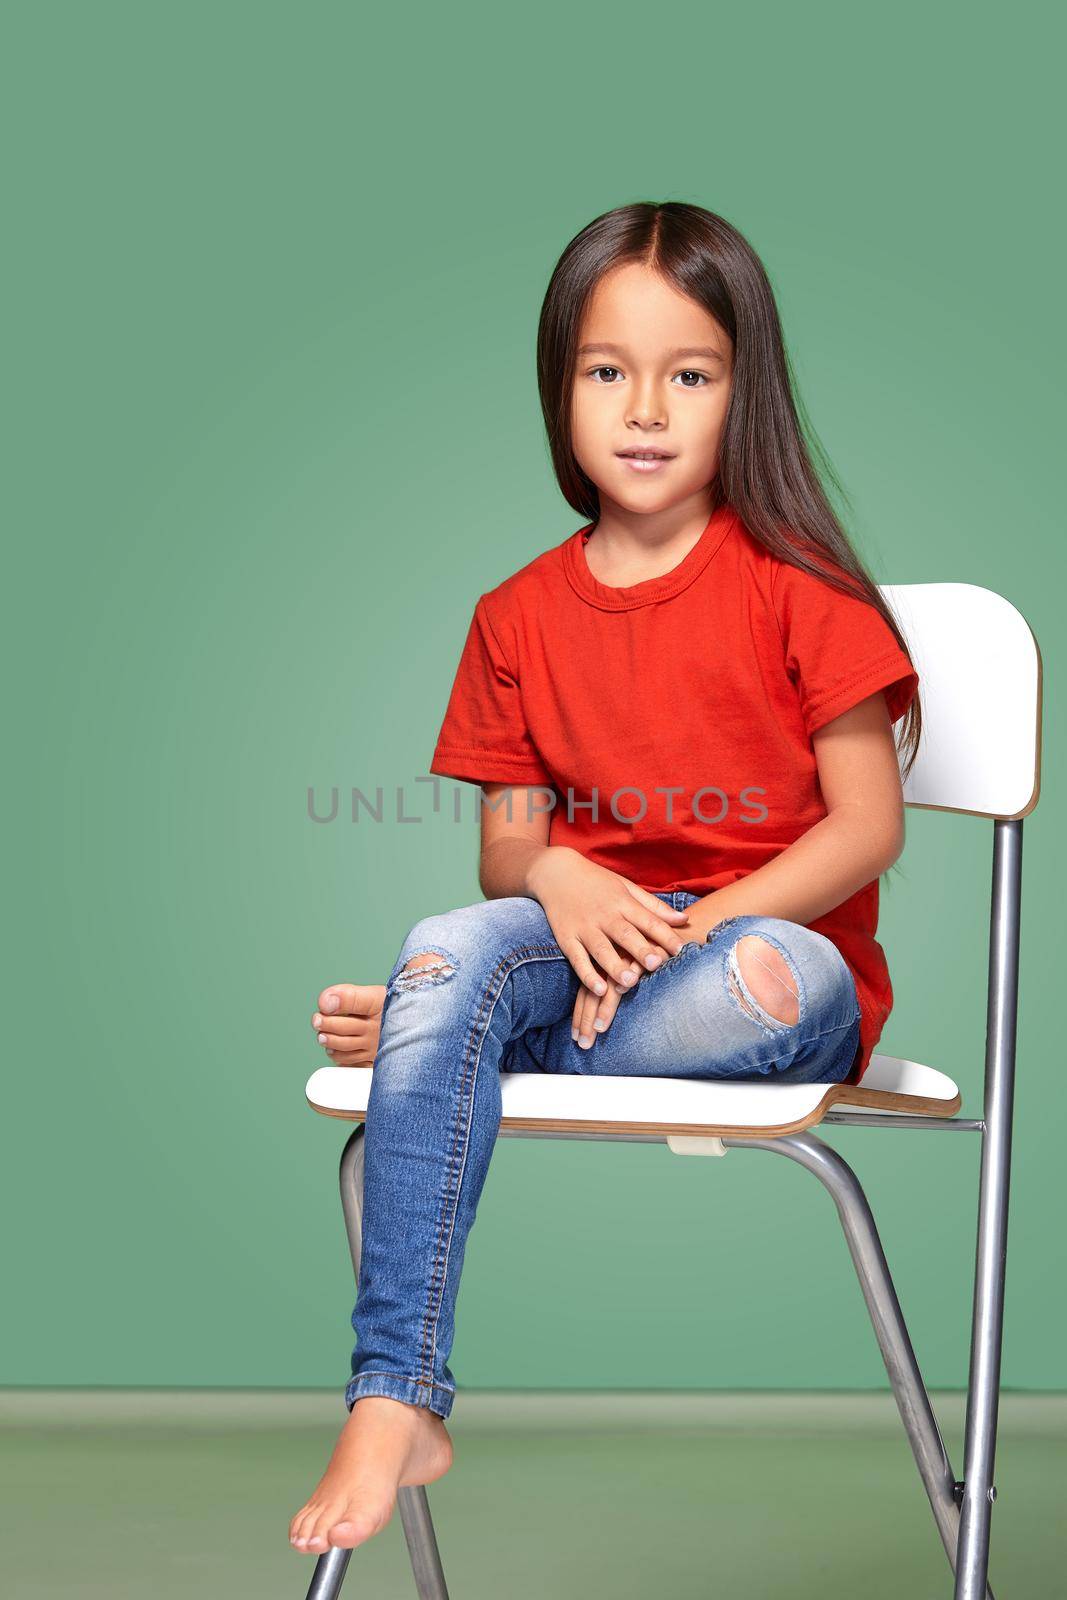 little girl wearing red t-short and posing on chair on green background